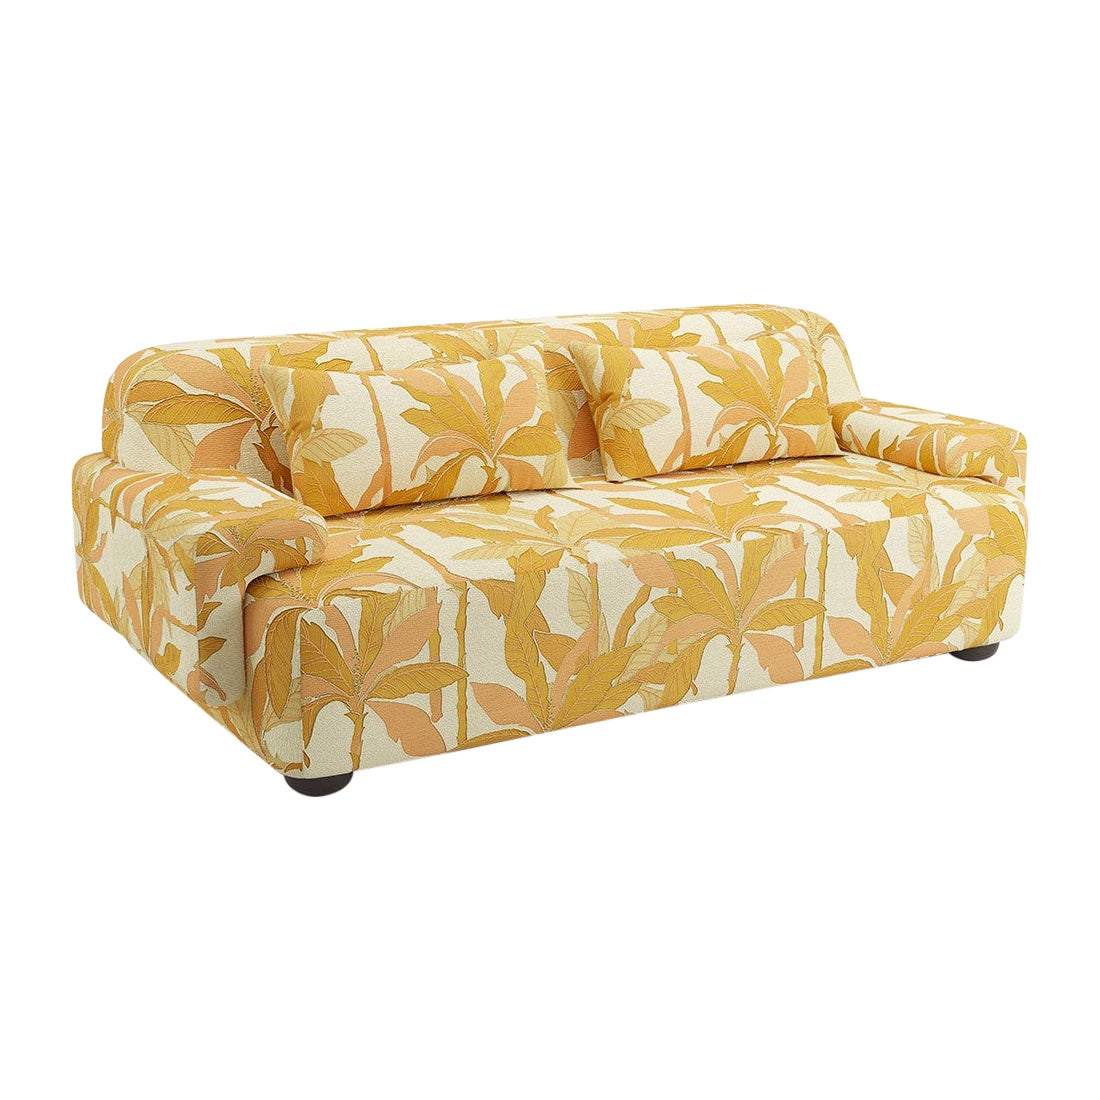 Popus Editions Lena 2.5 Seater Sofa in Rust Miami Jacquard Upholstery For Sale